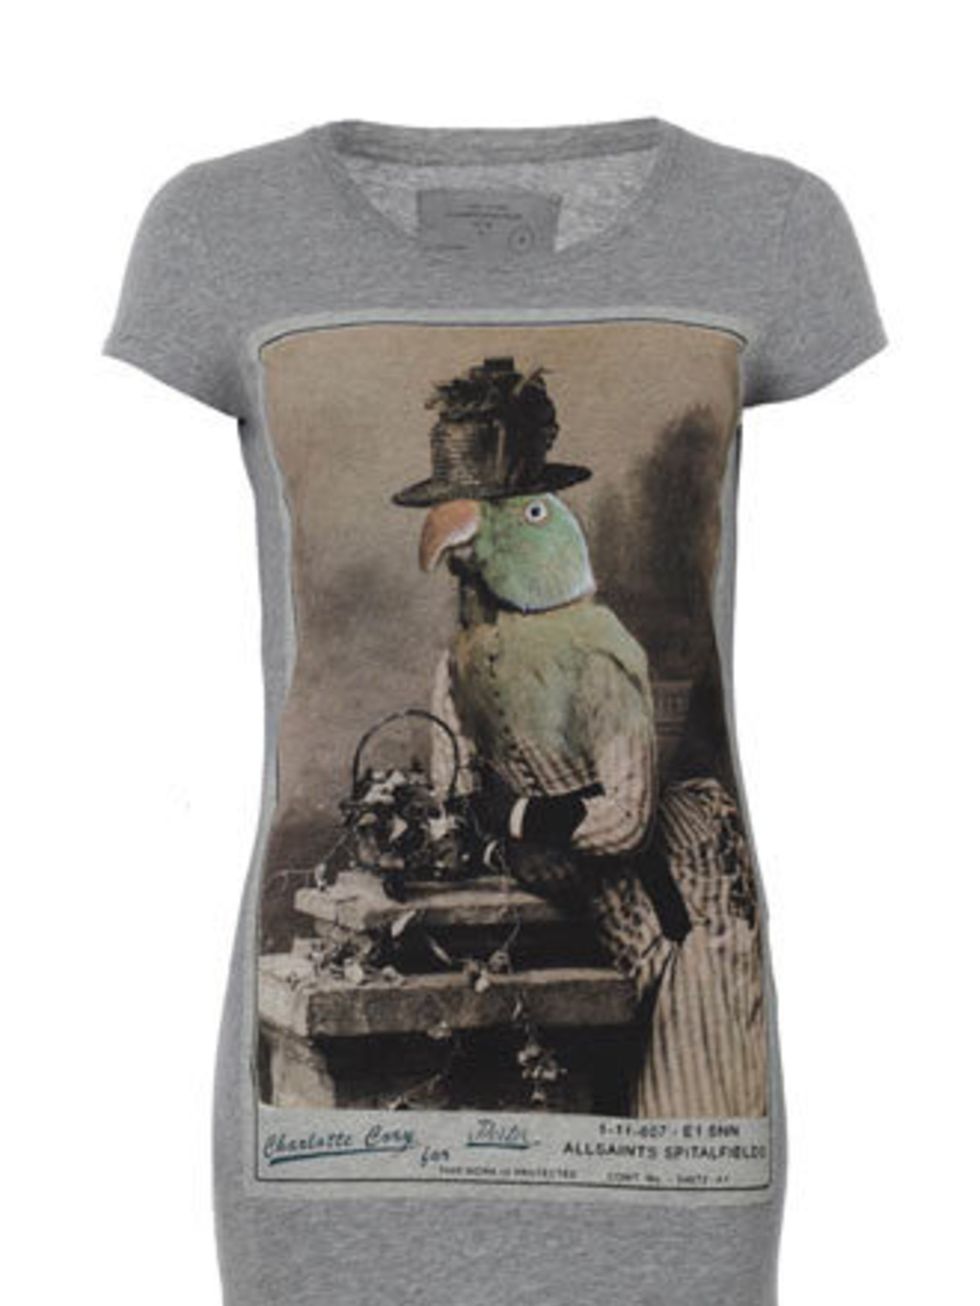 <p>Team ELLE have fallen in love with this All Saints T-Shirt designed by artist and author Charlotte Cory. A parrot in a dress - that certainly brightens our January mood.</p><p>T-Shirt, £40 by <a href="http://www.allsaints.com/product/?page=1&amp;catego